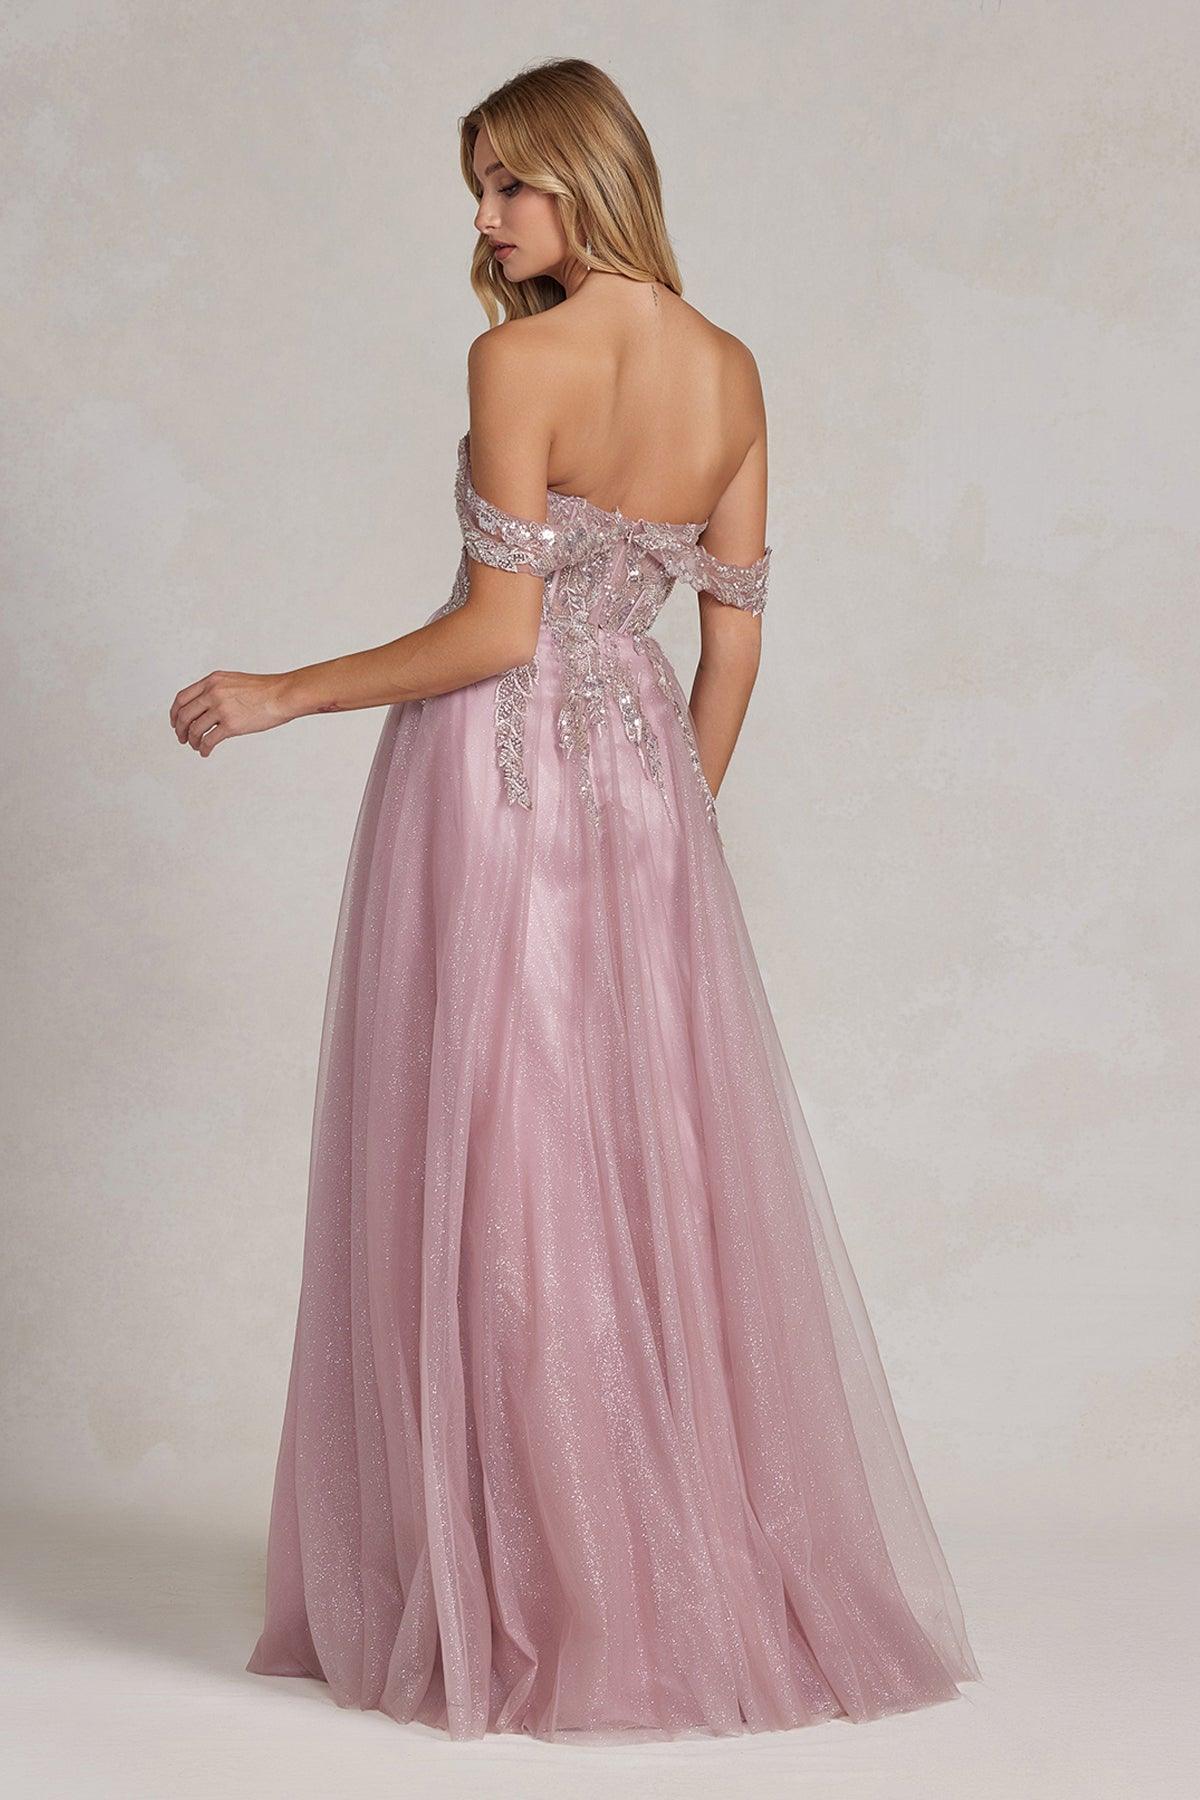 Nox Anabel E1128 Long Off Shoulder Beaded Prom Gown Rose